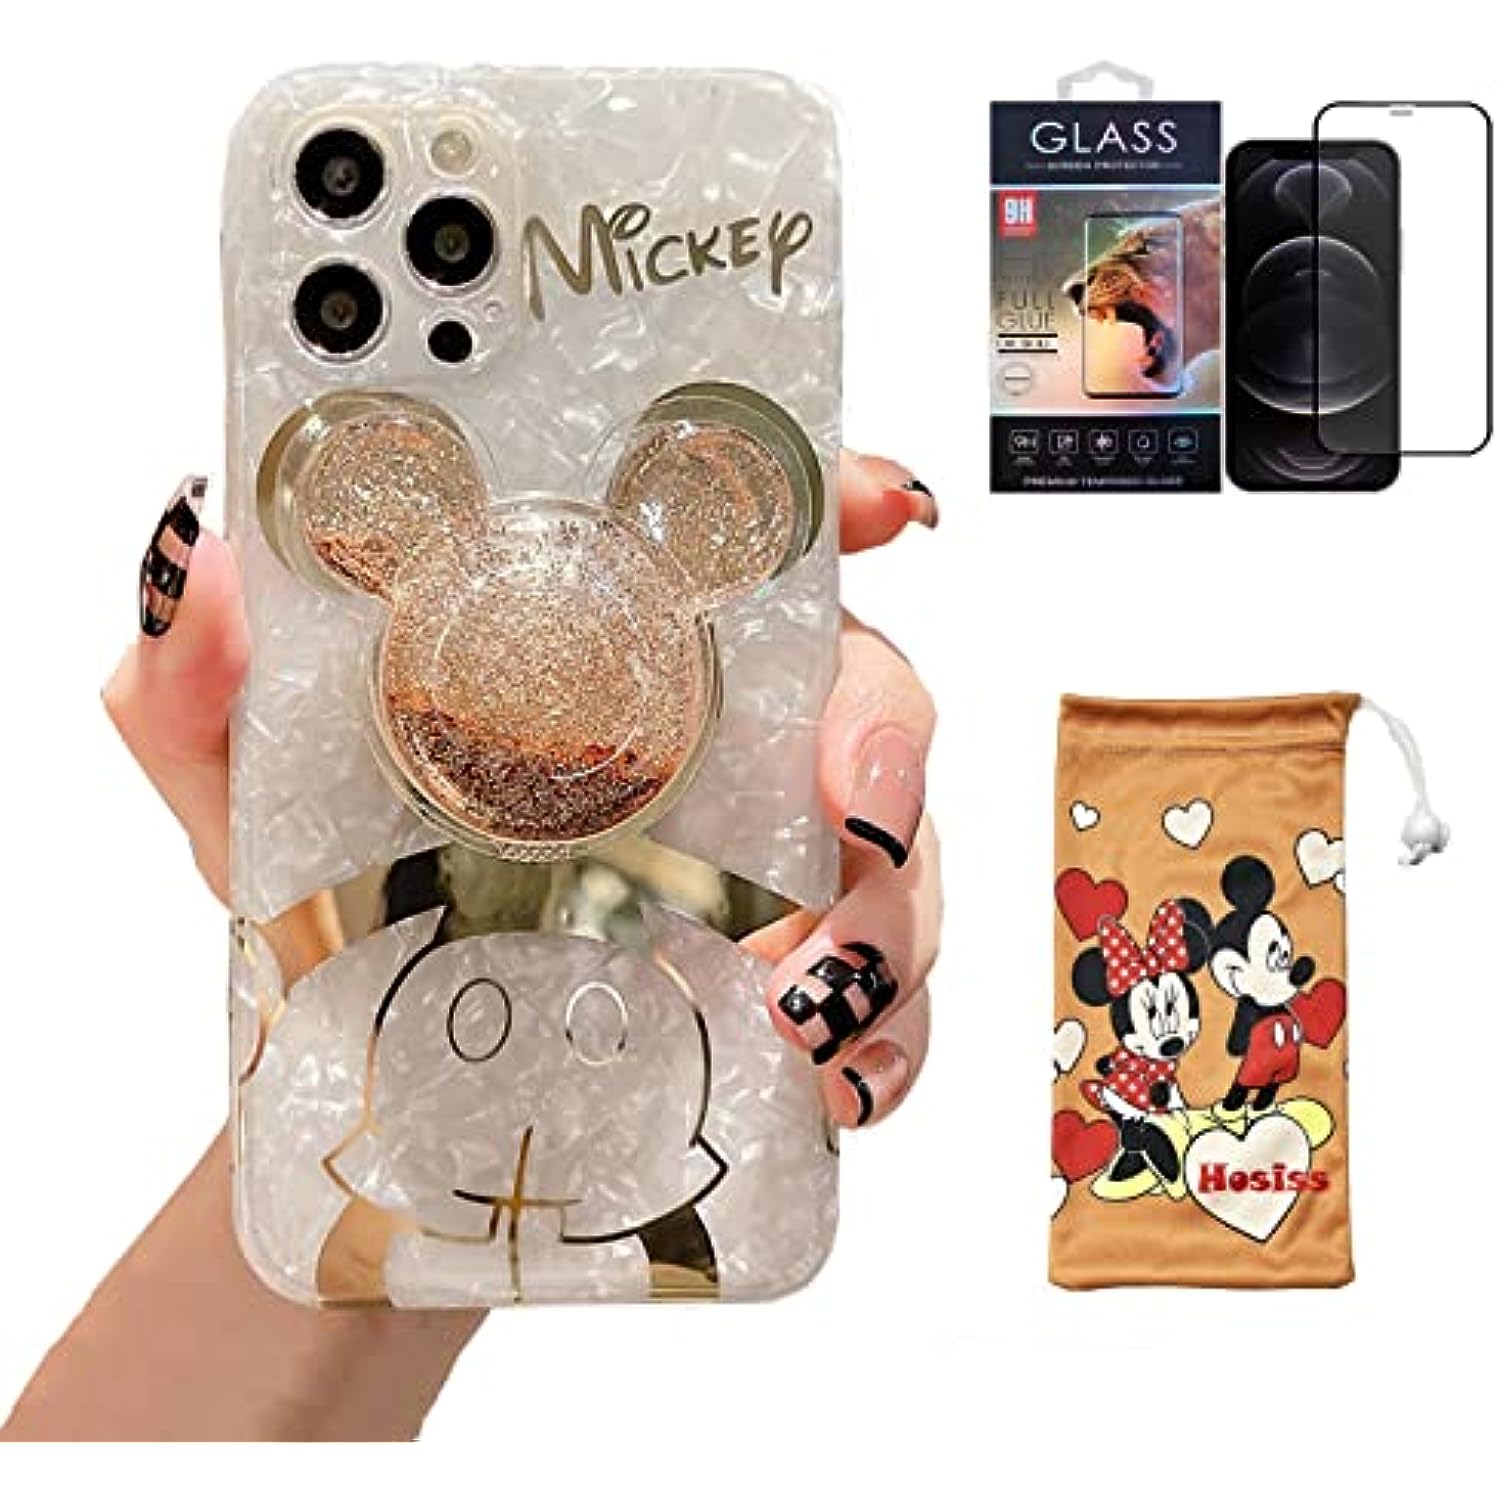 Cartoon Case for iPhone 14 Pro Max with HD Screen Protector Quicksand Cell Phone Pouch